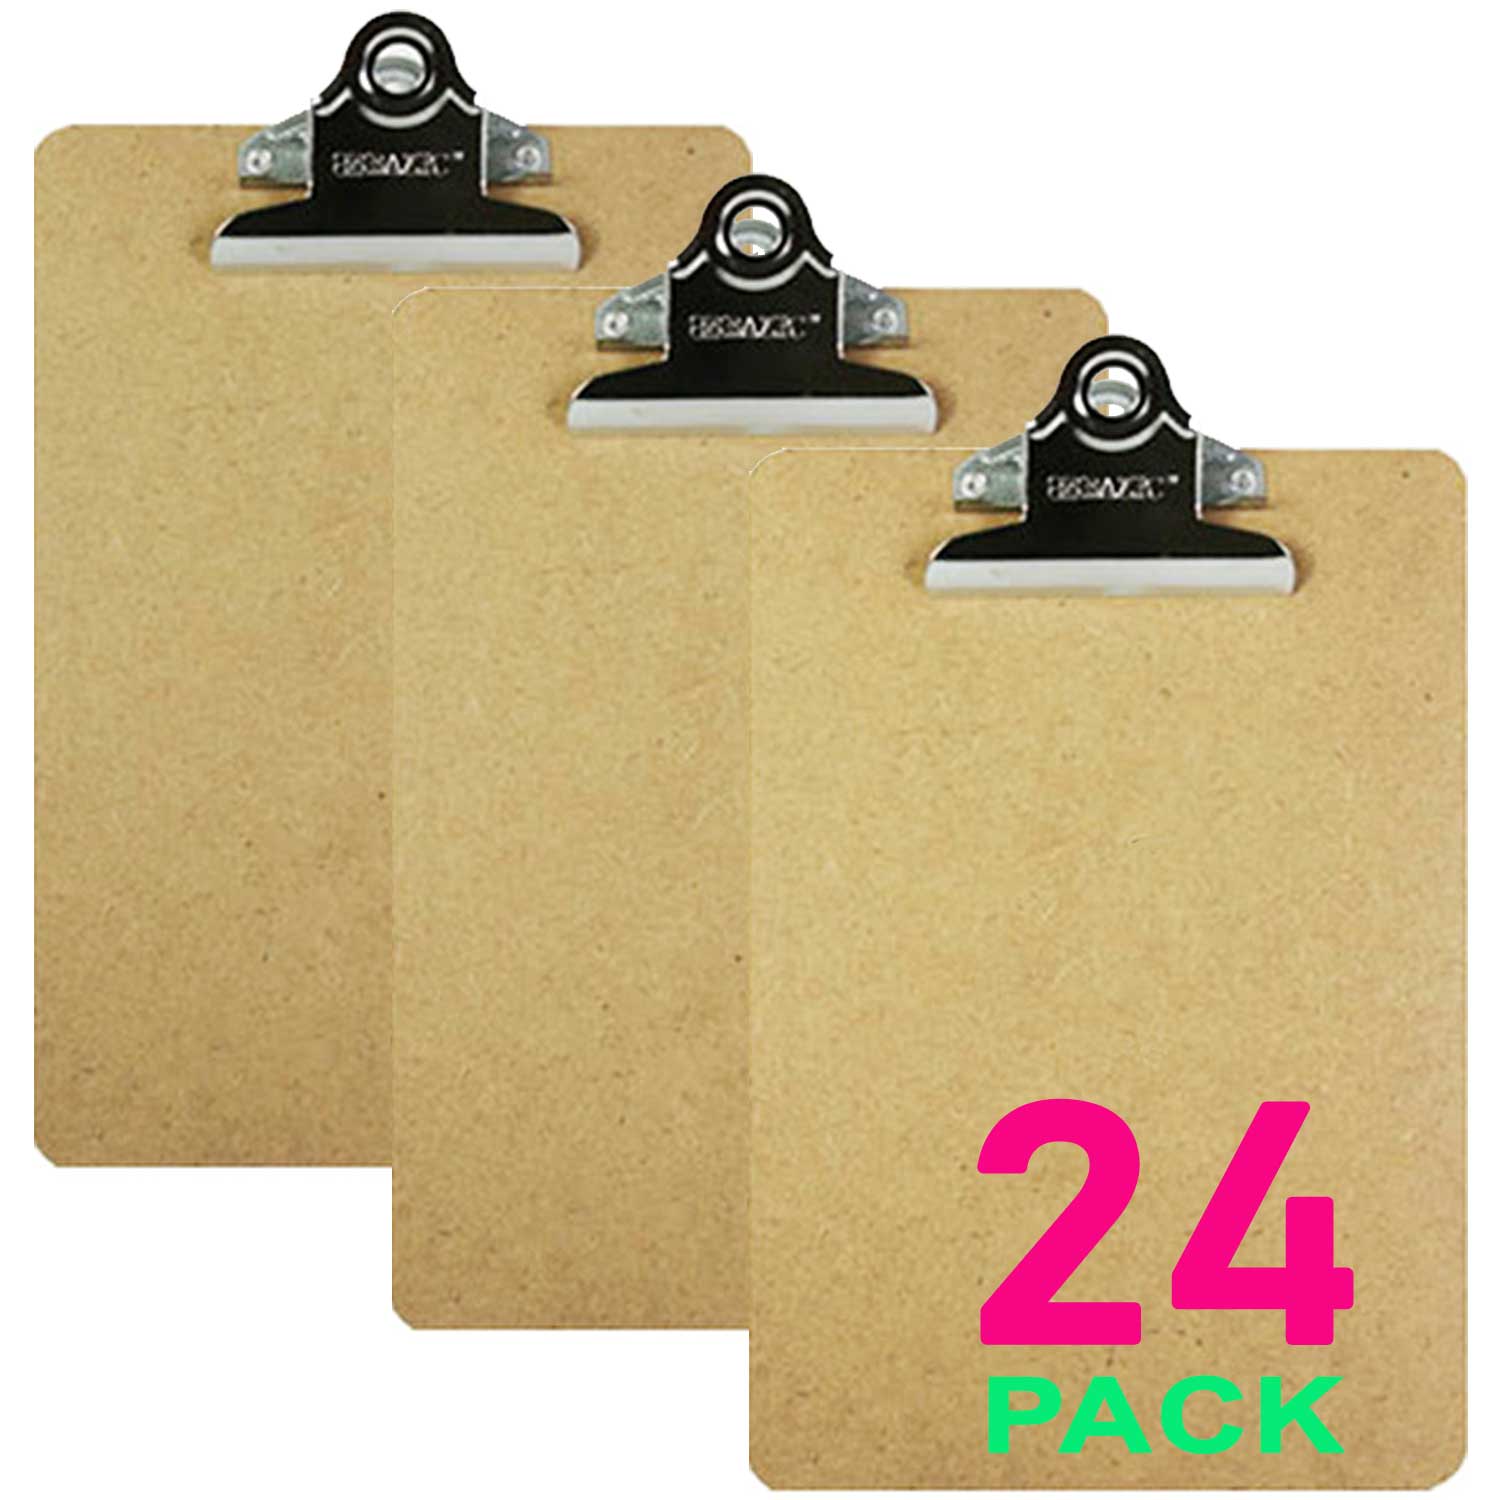 Memo Size Clipboard (Wood) w/Sturdy Spring Clip, 24 Pack